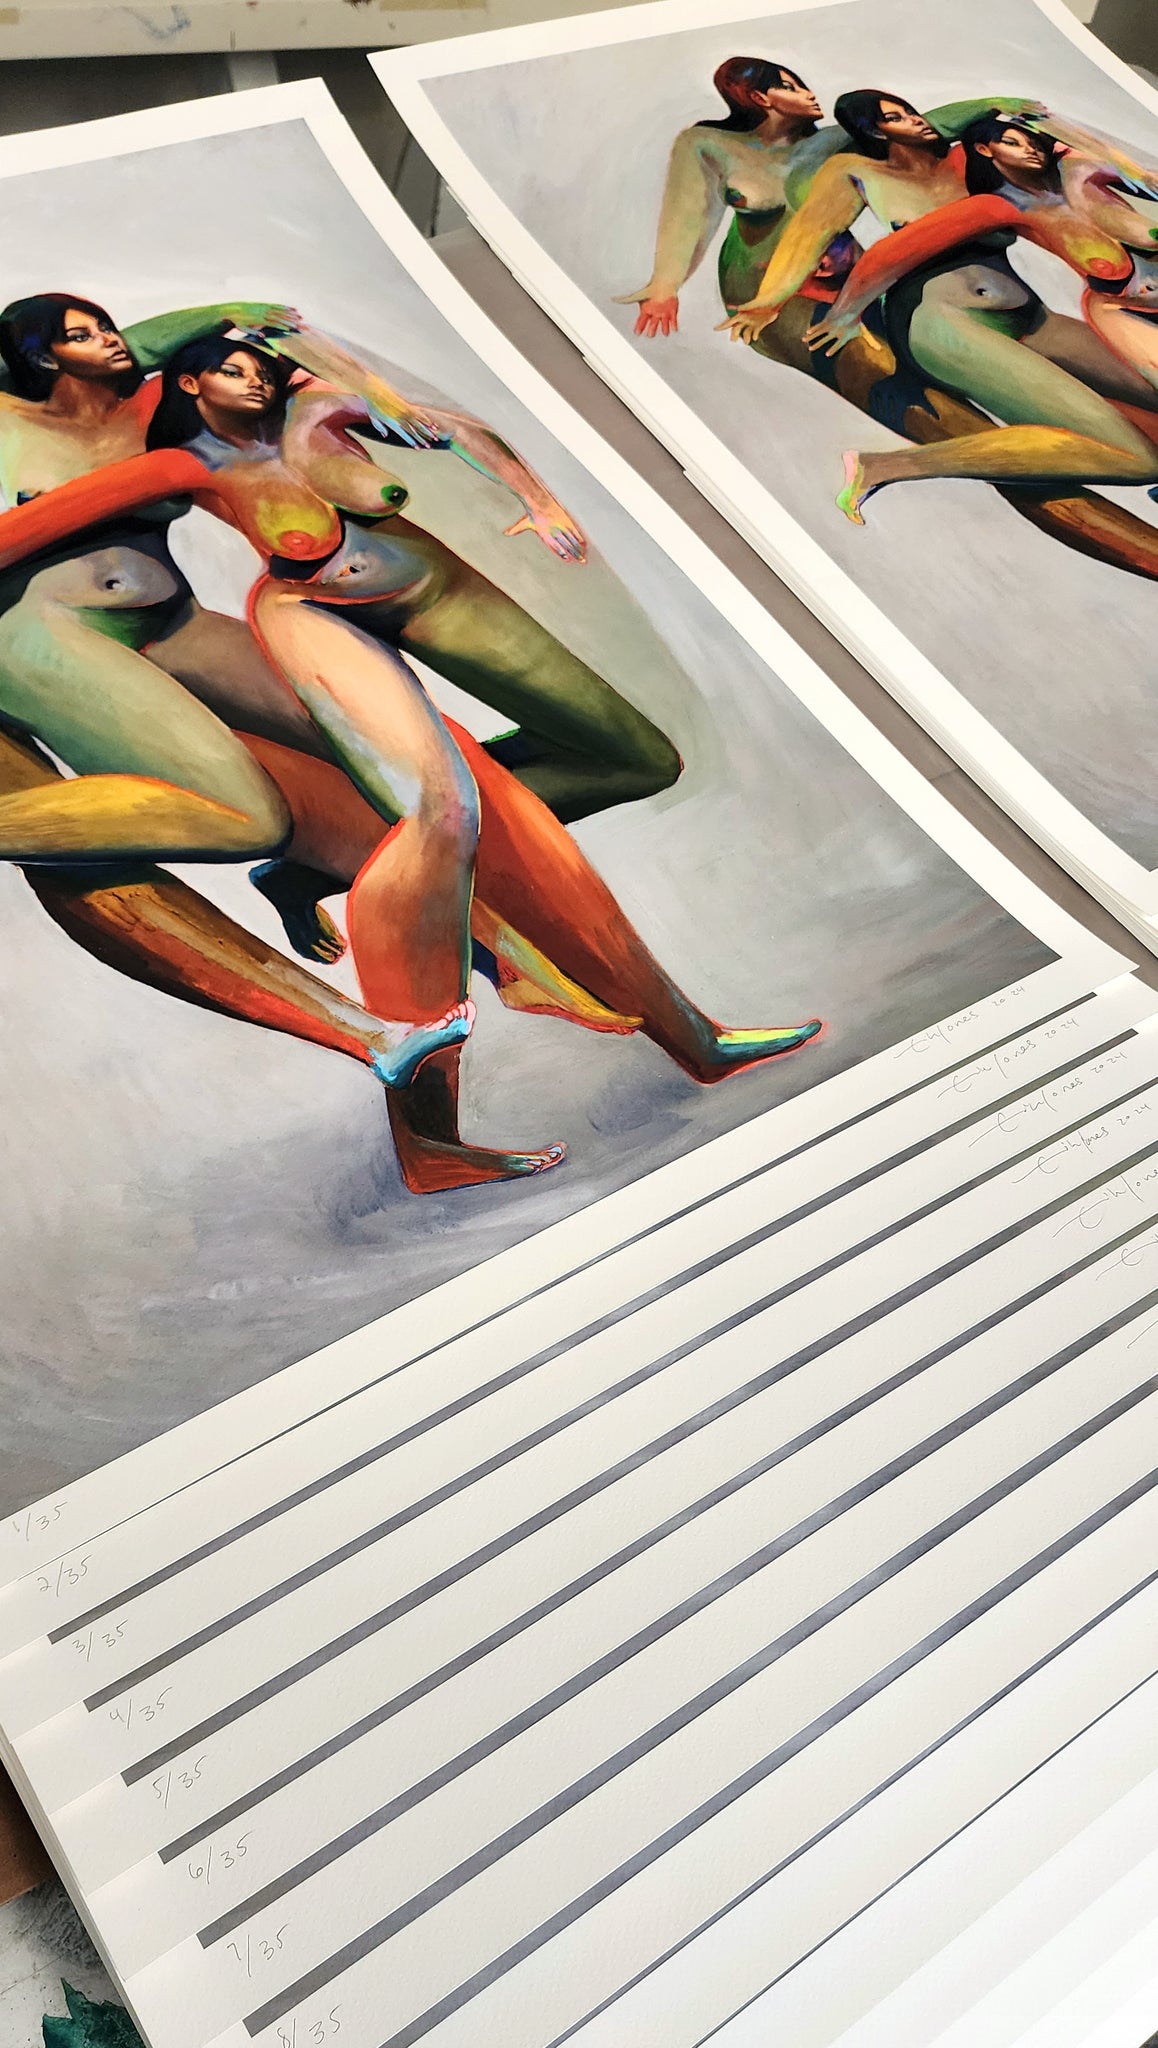 Erik Jones print of three nude figures with the same face and colorful bodies  - print stacked on top of each other